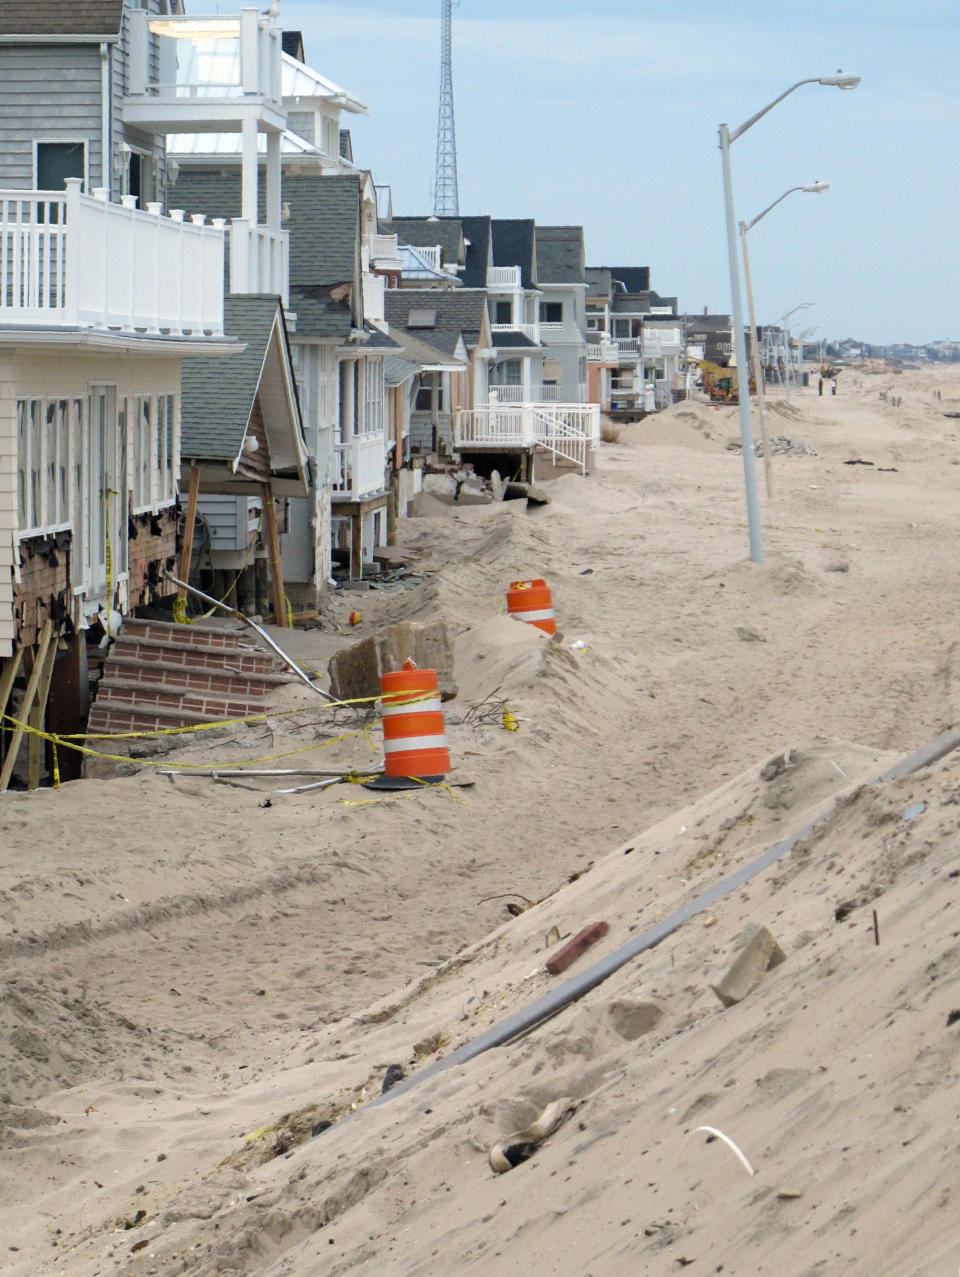 This Jan. 9, 2013 photo shows the beach walk in Manasquan N.J. buried under tons of sand seven weeks after Superstorm Sandy. The town decided not to rebuild its dunes following Sandy, but the U.S. Army Corps of Engineers will review whether the handful of places along the New Jersey shore that don't have dunes now should build them. (AP Photo/Wayne Parry)